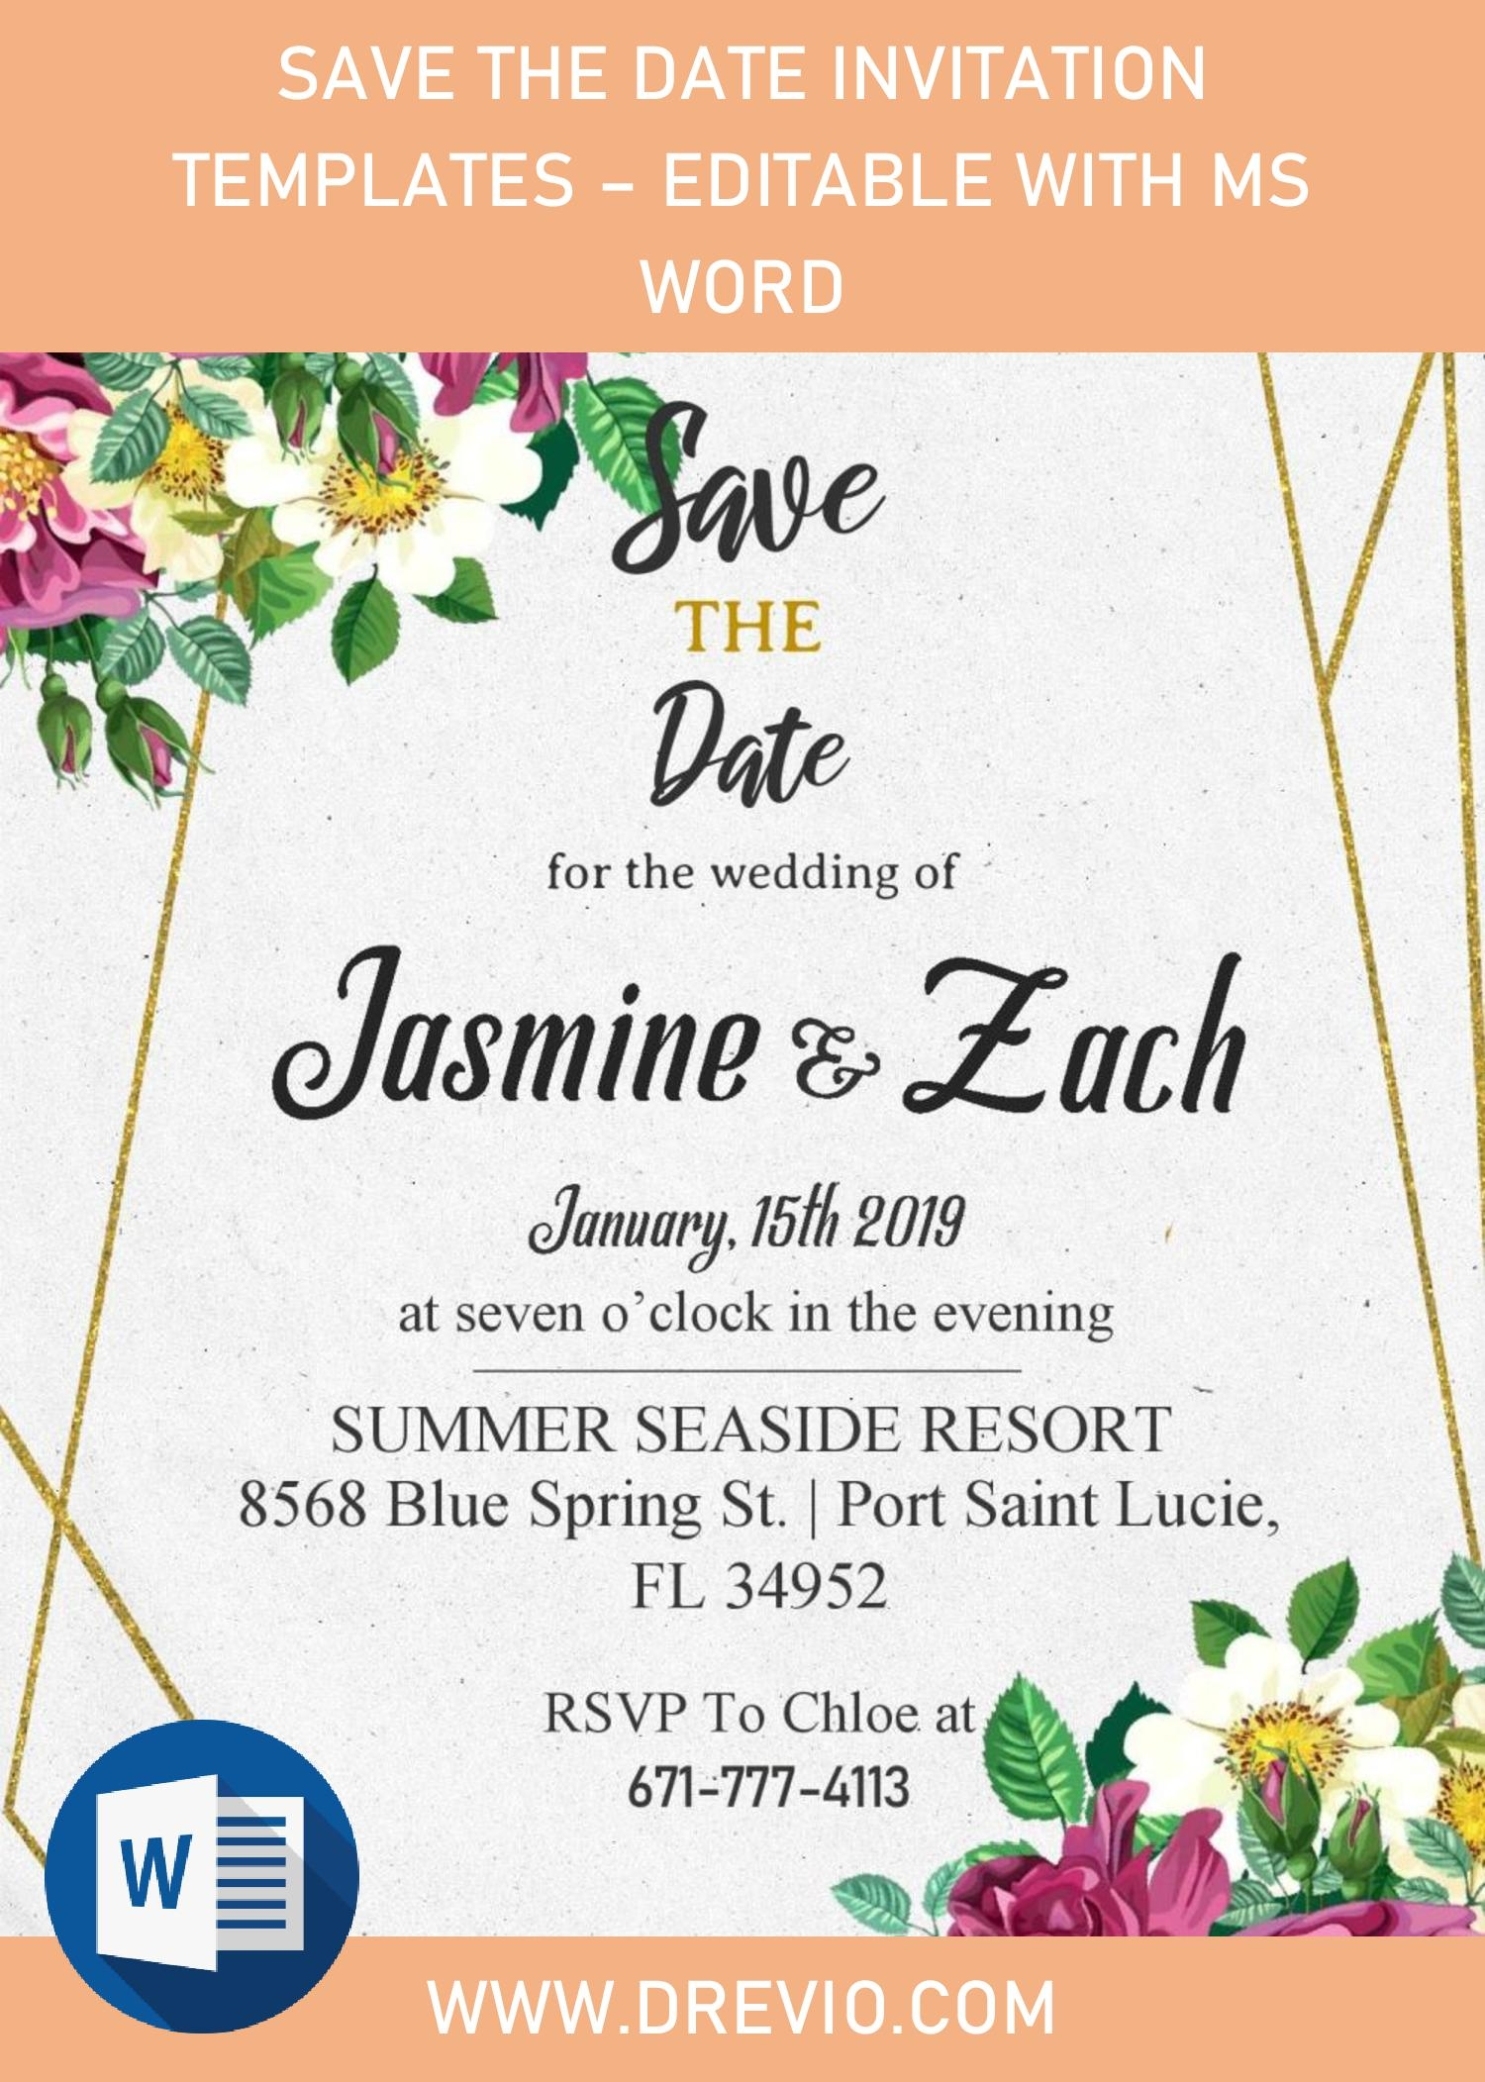 Save The Date Invitation Templates - Editable With Ms Word | Drevio Inside Save The Date Templates Word